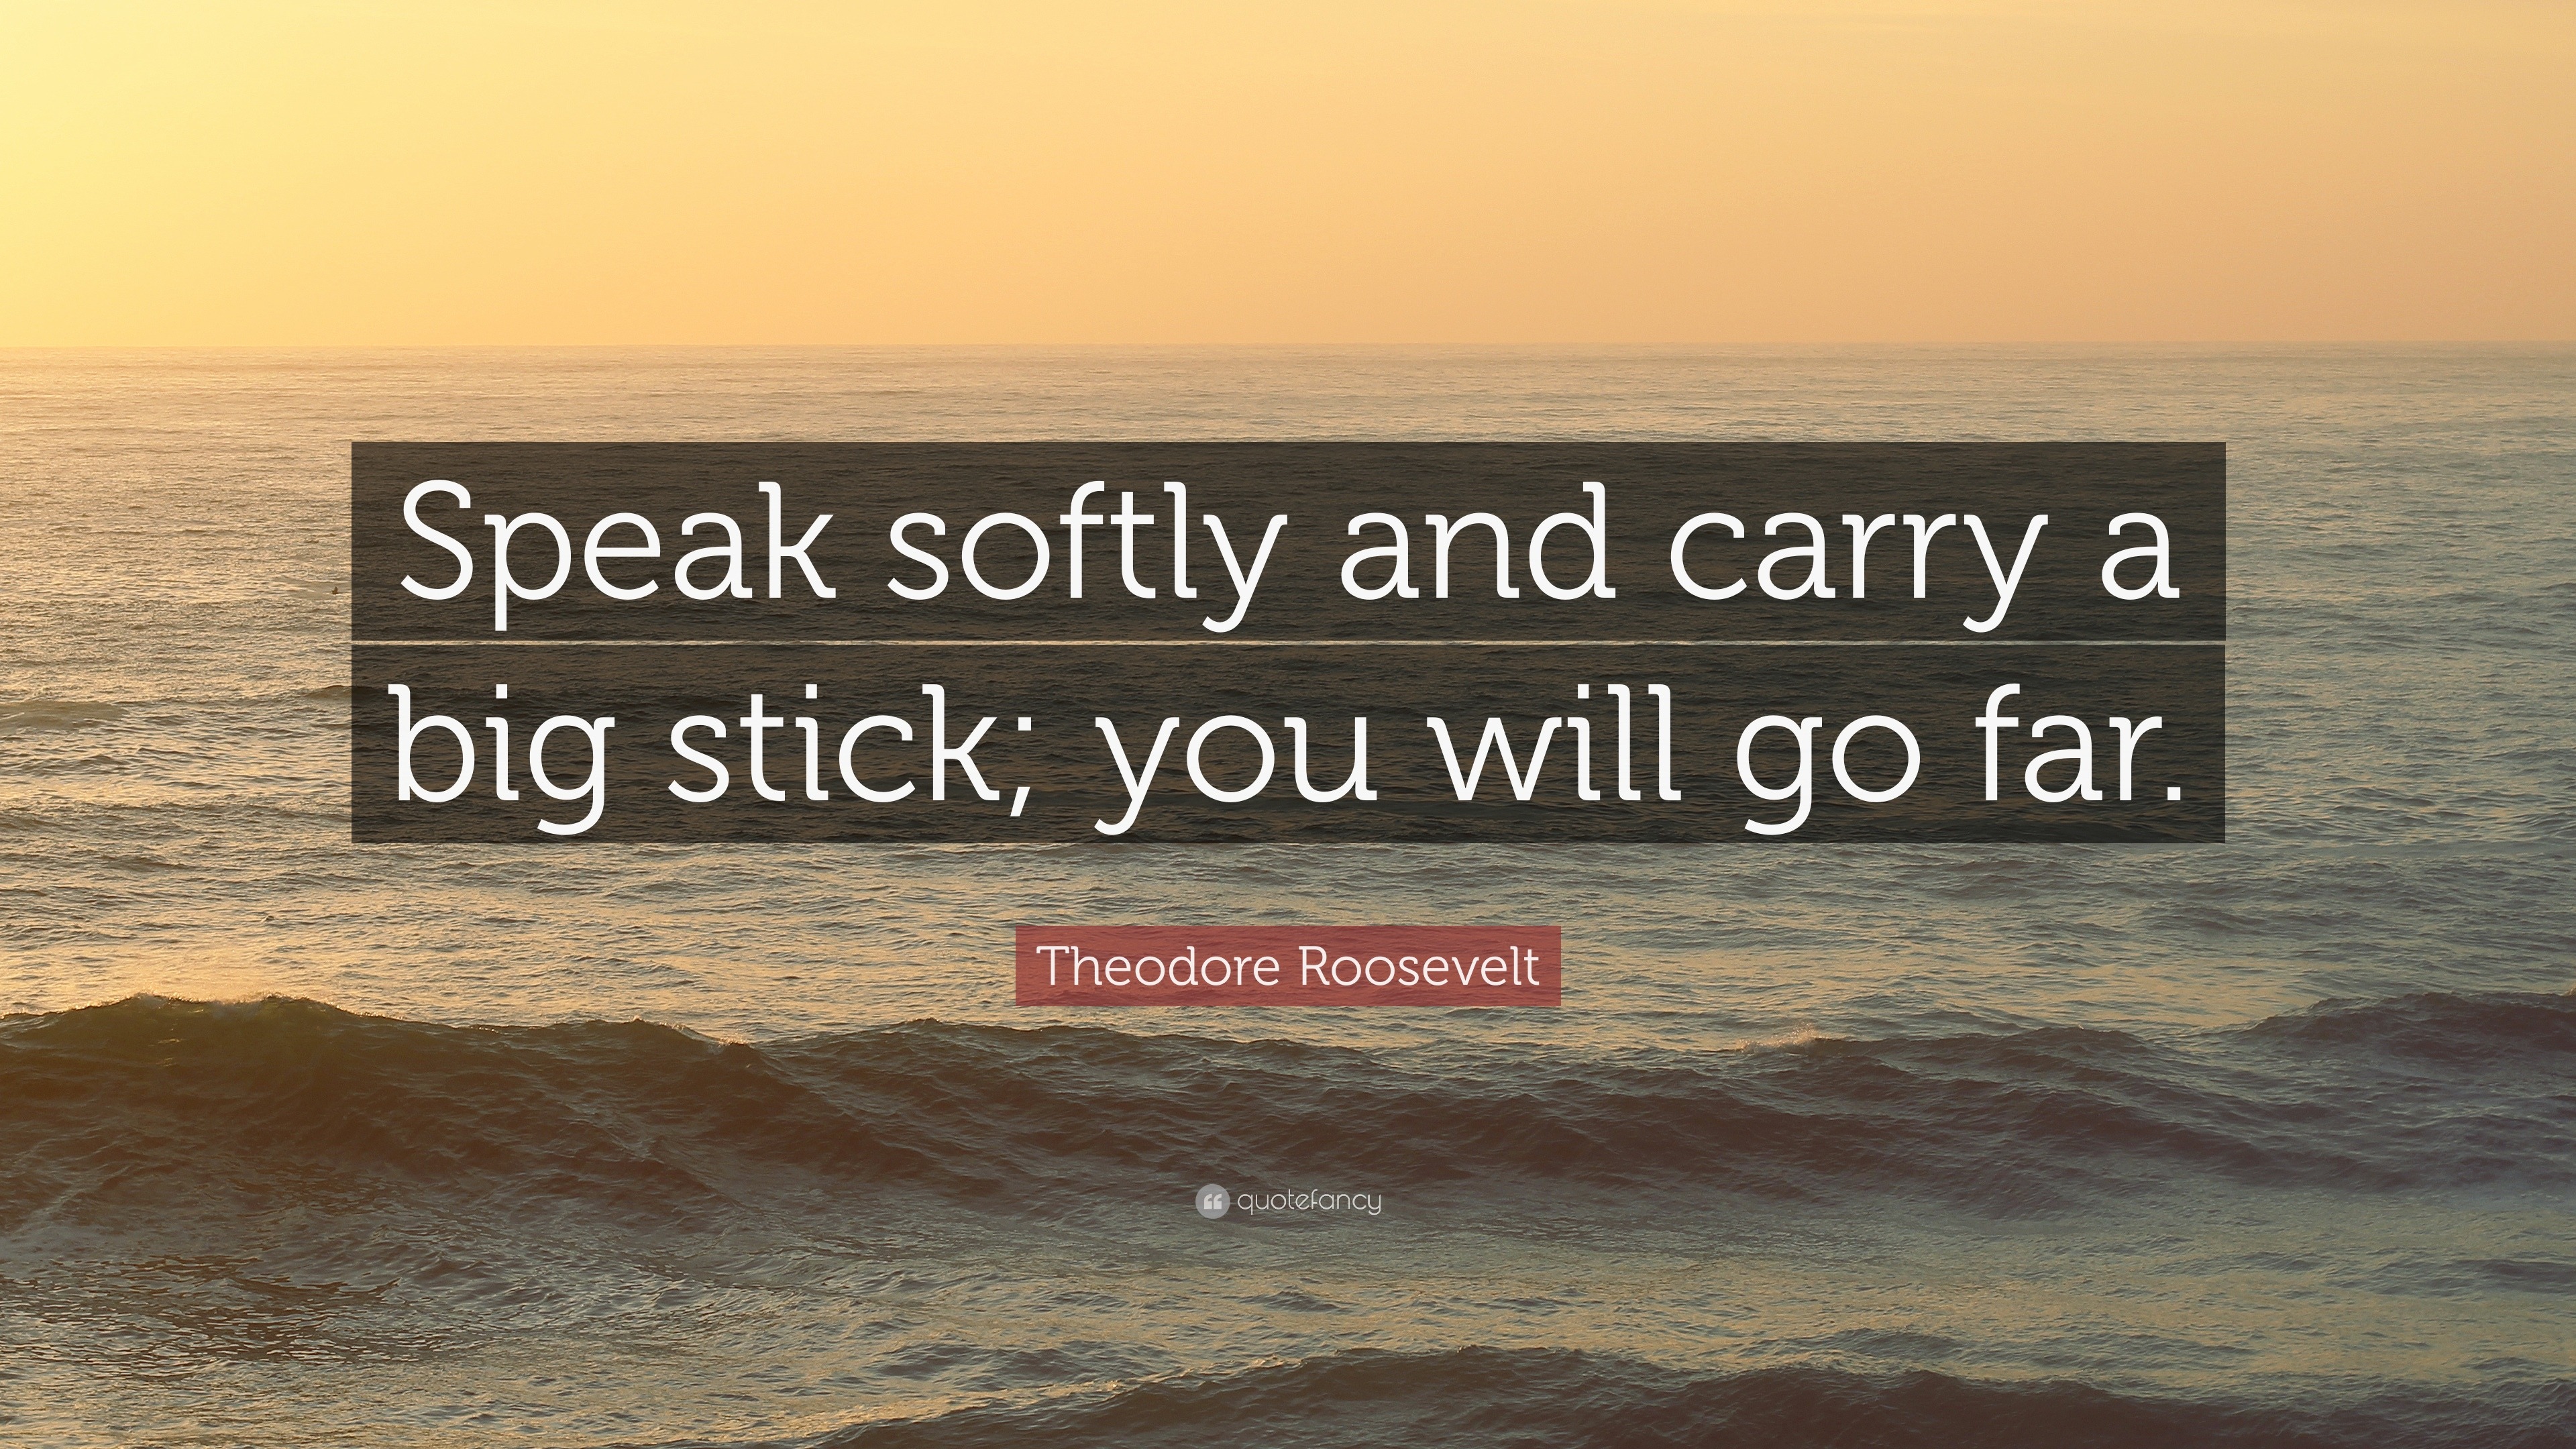 Roosevelt carry a big stick quote